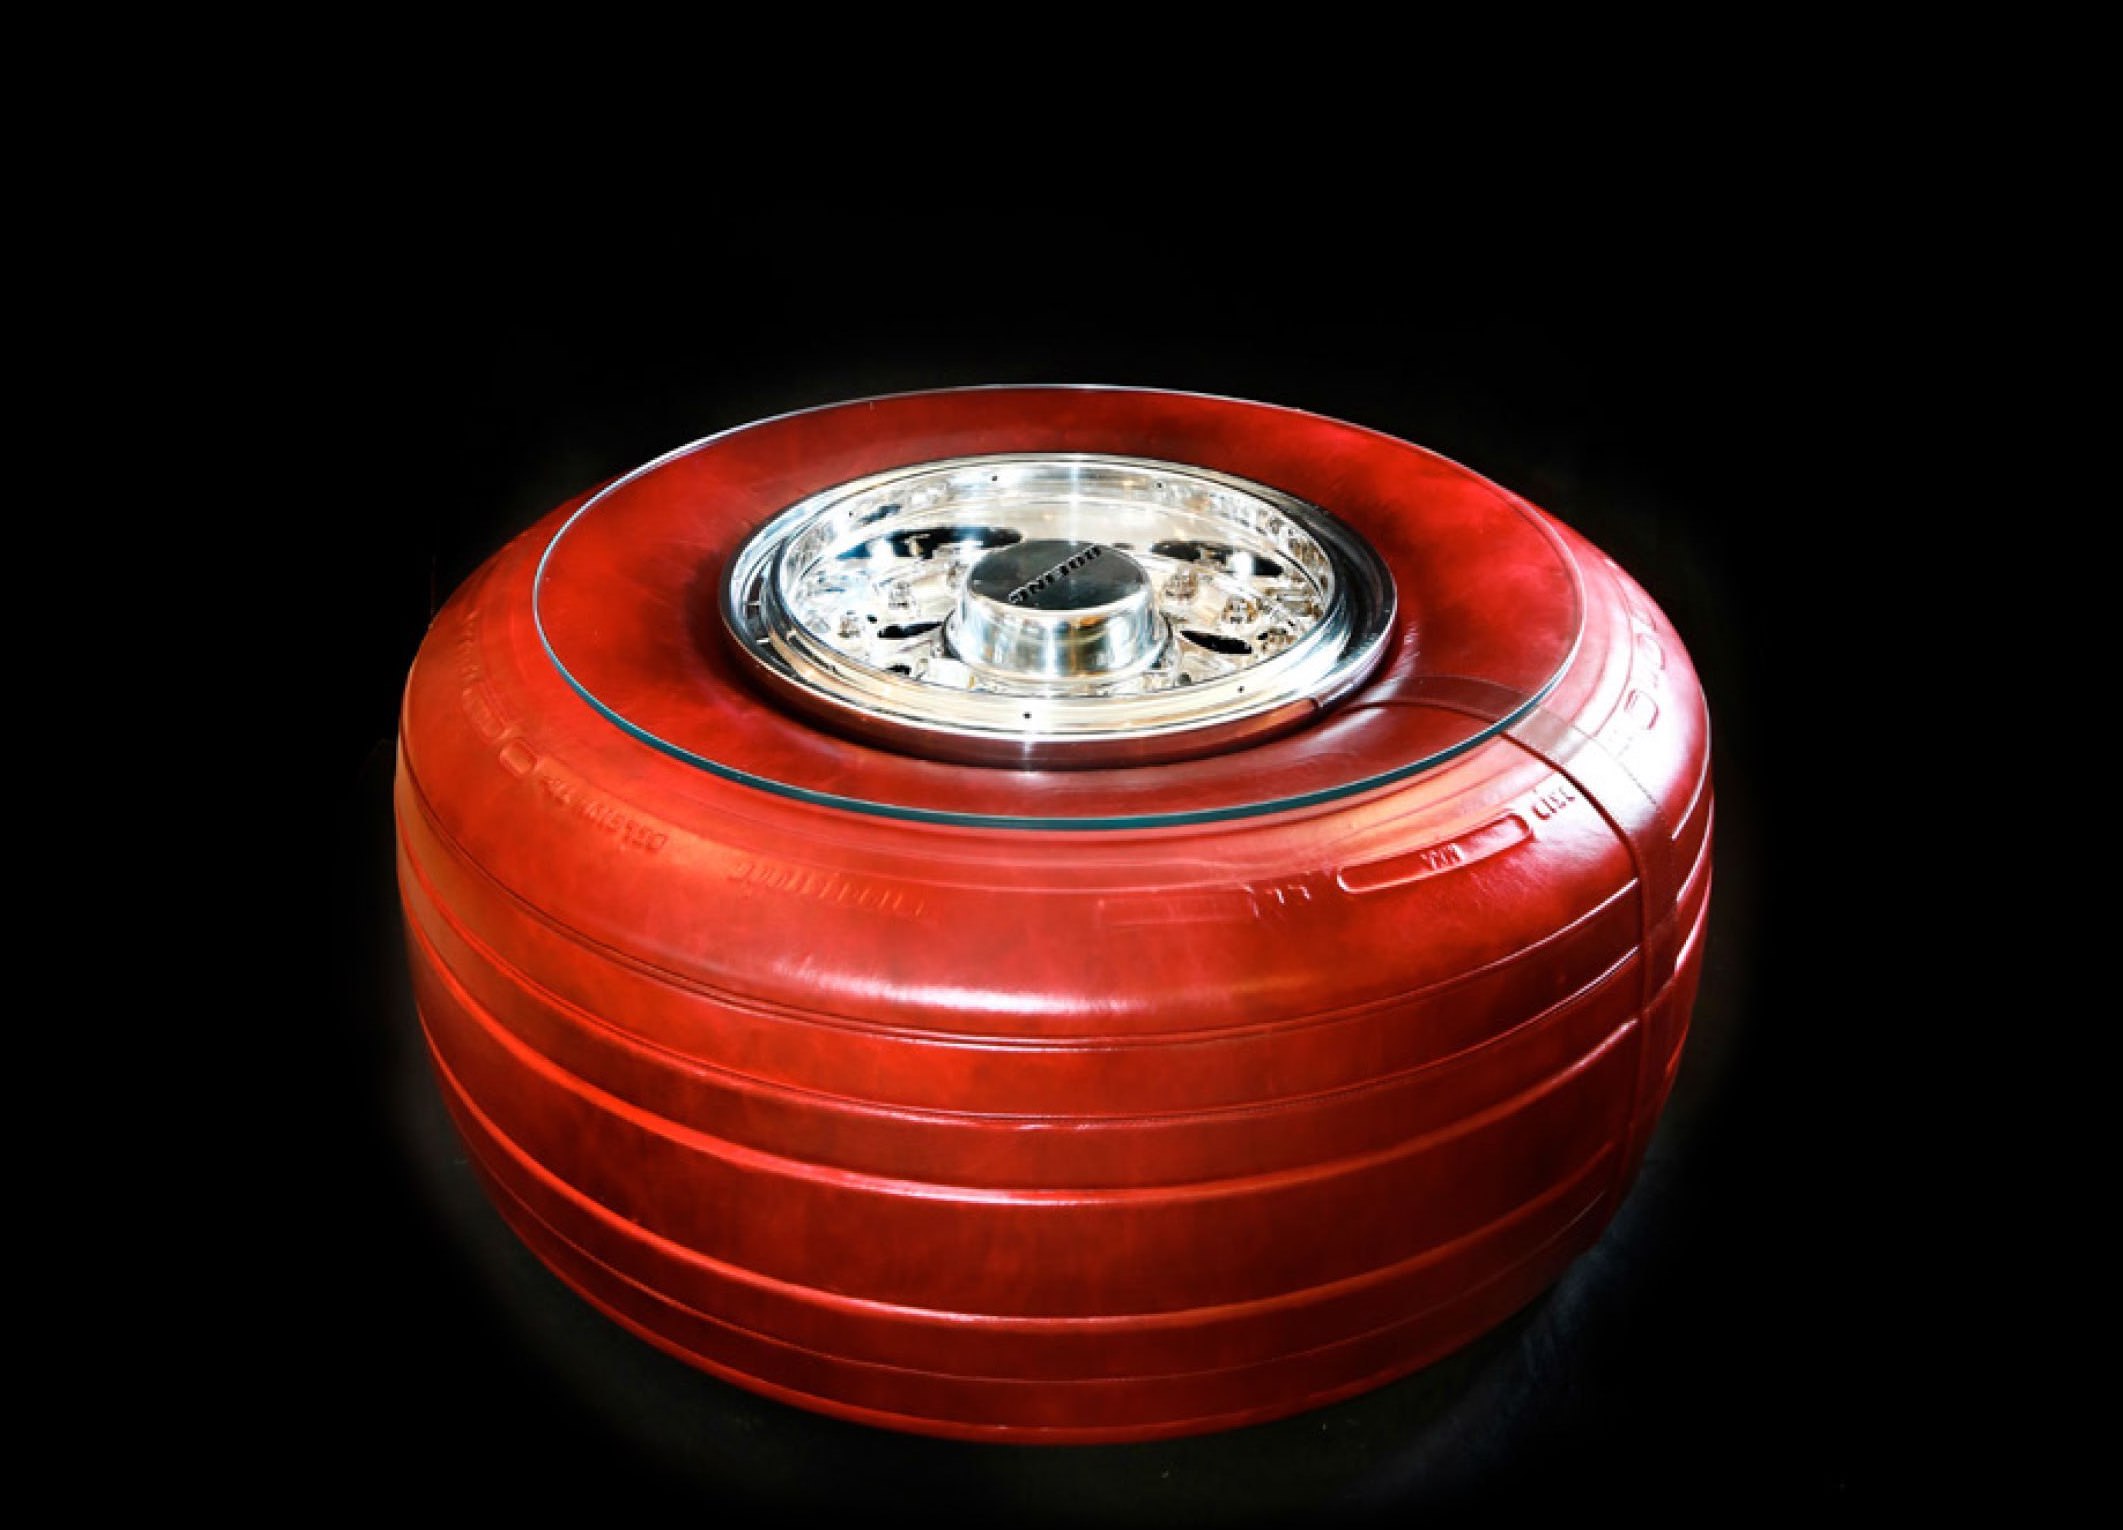 Boeing 747 Wheel + Tire Coffee Table by Plane Industries